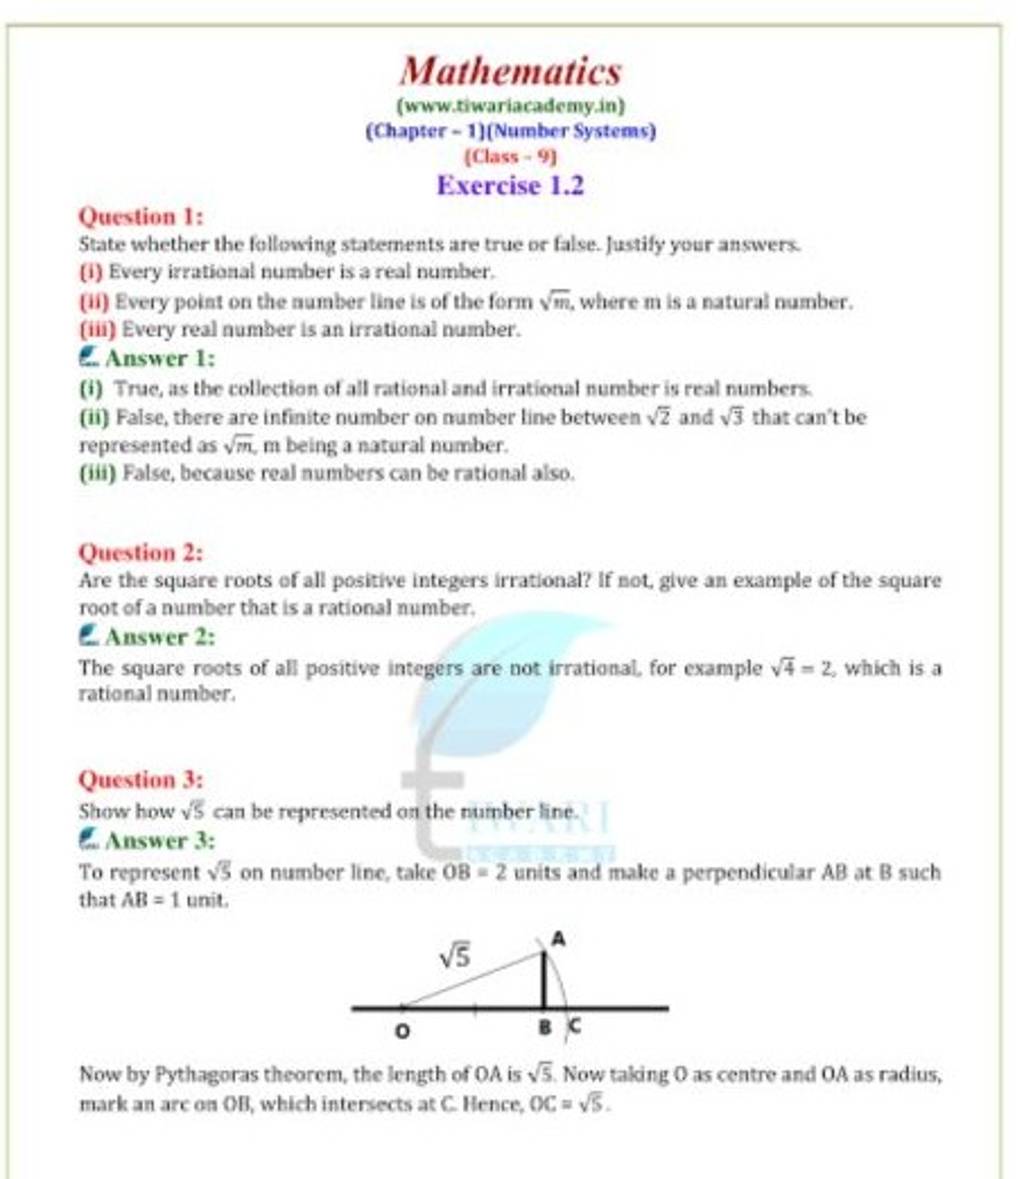 Mathematics(www.tiwariacademy.in)(Chapter - 1)(Number Systems)[Class −